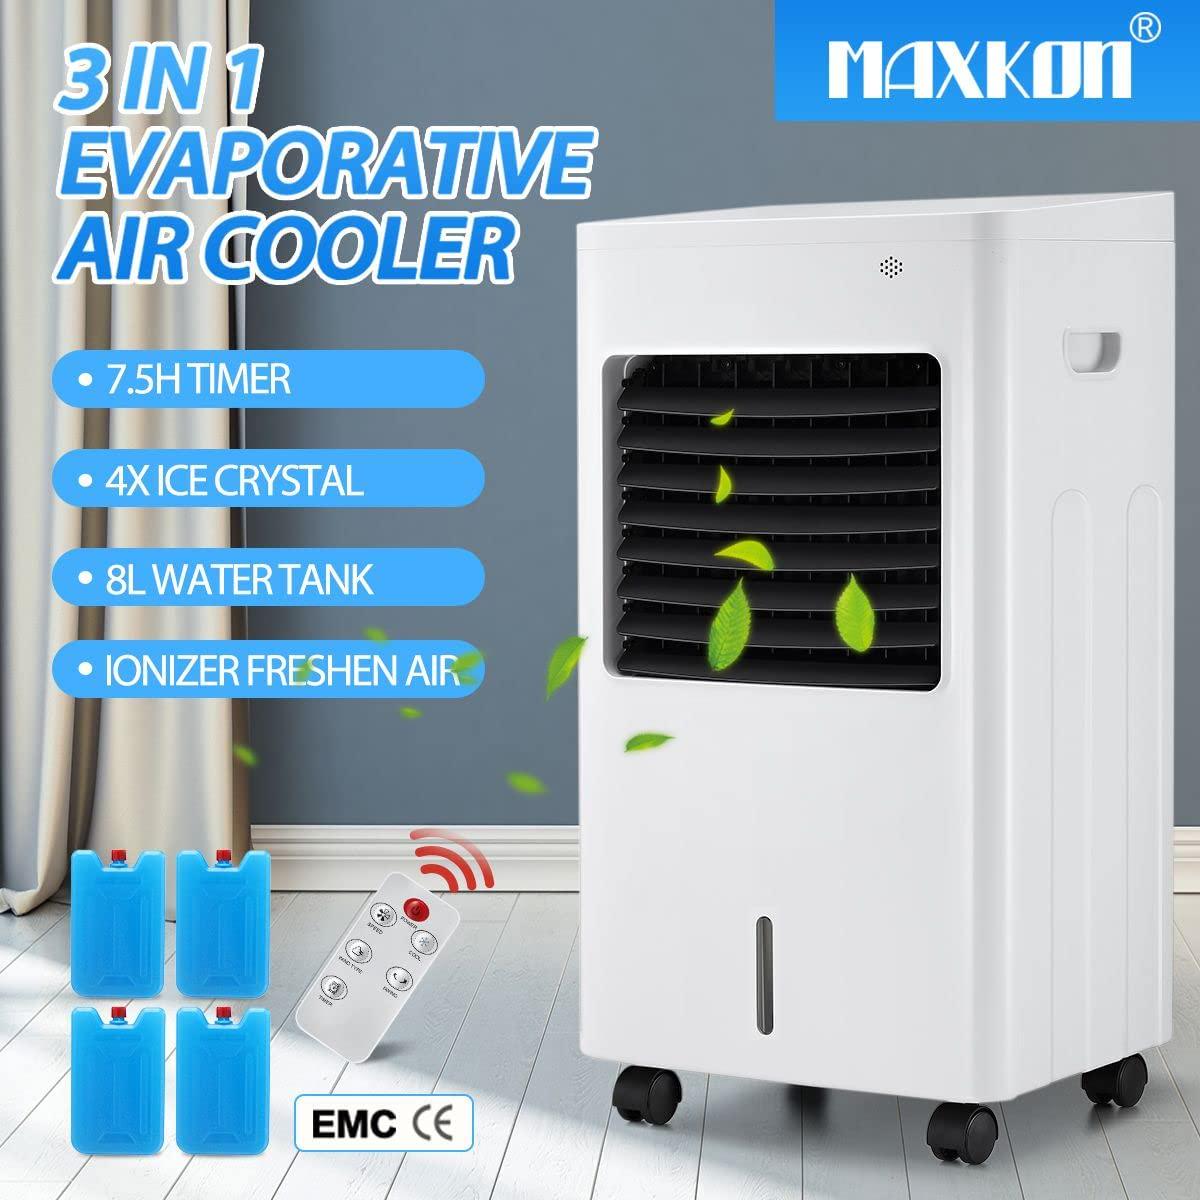 Maxkon, Maxkon Evaporative Cooler 3in1 Air Cooler,8L Water Tank,Purifier Humidifier Portable Cooling Fan,4x Ice Crystal,White and Black